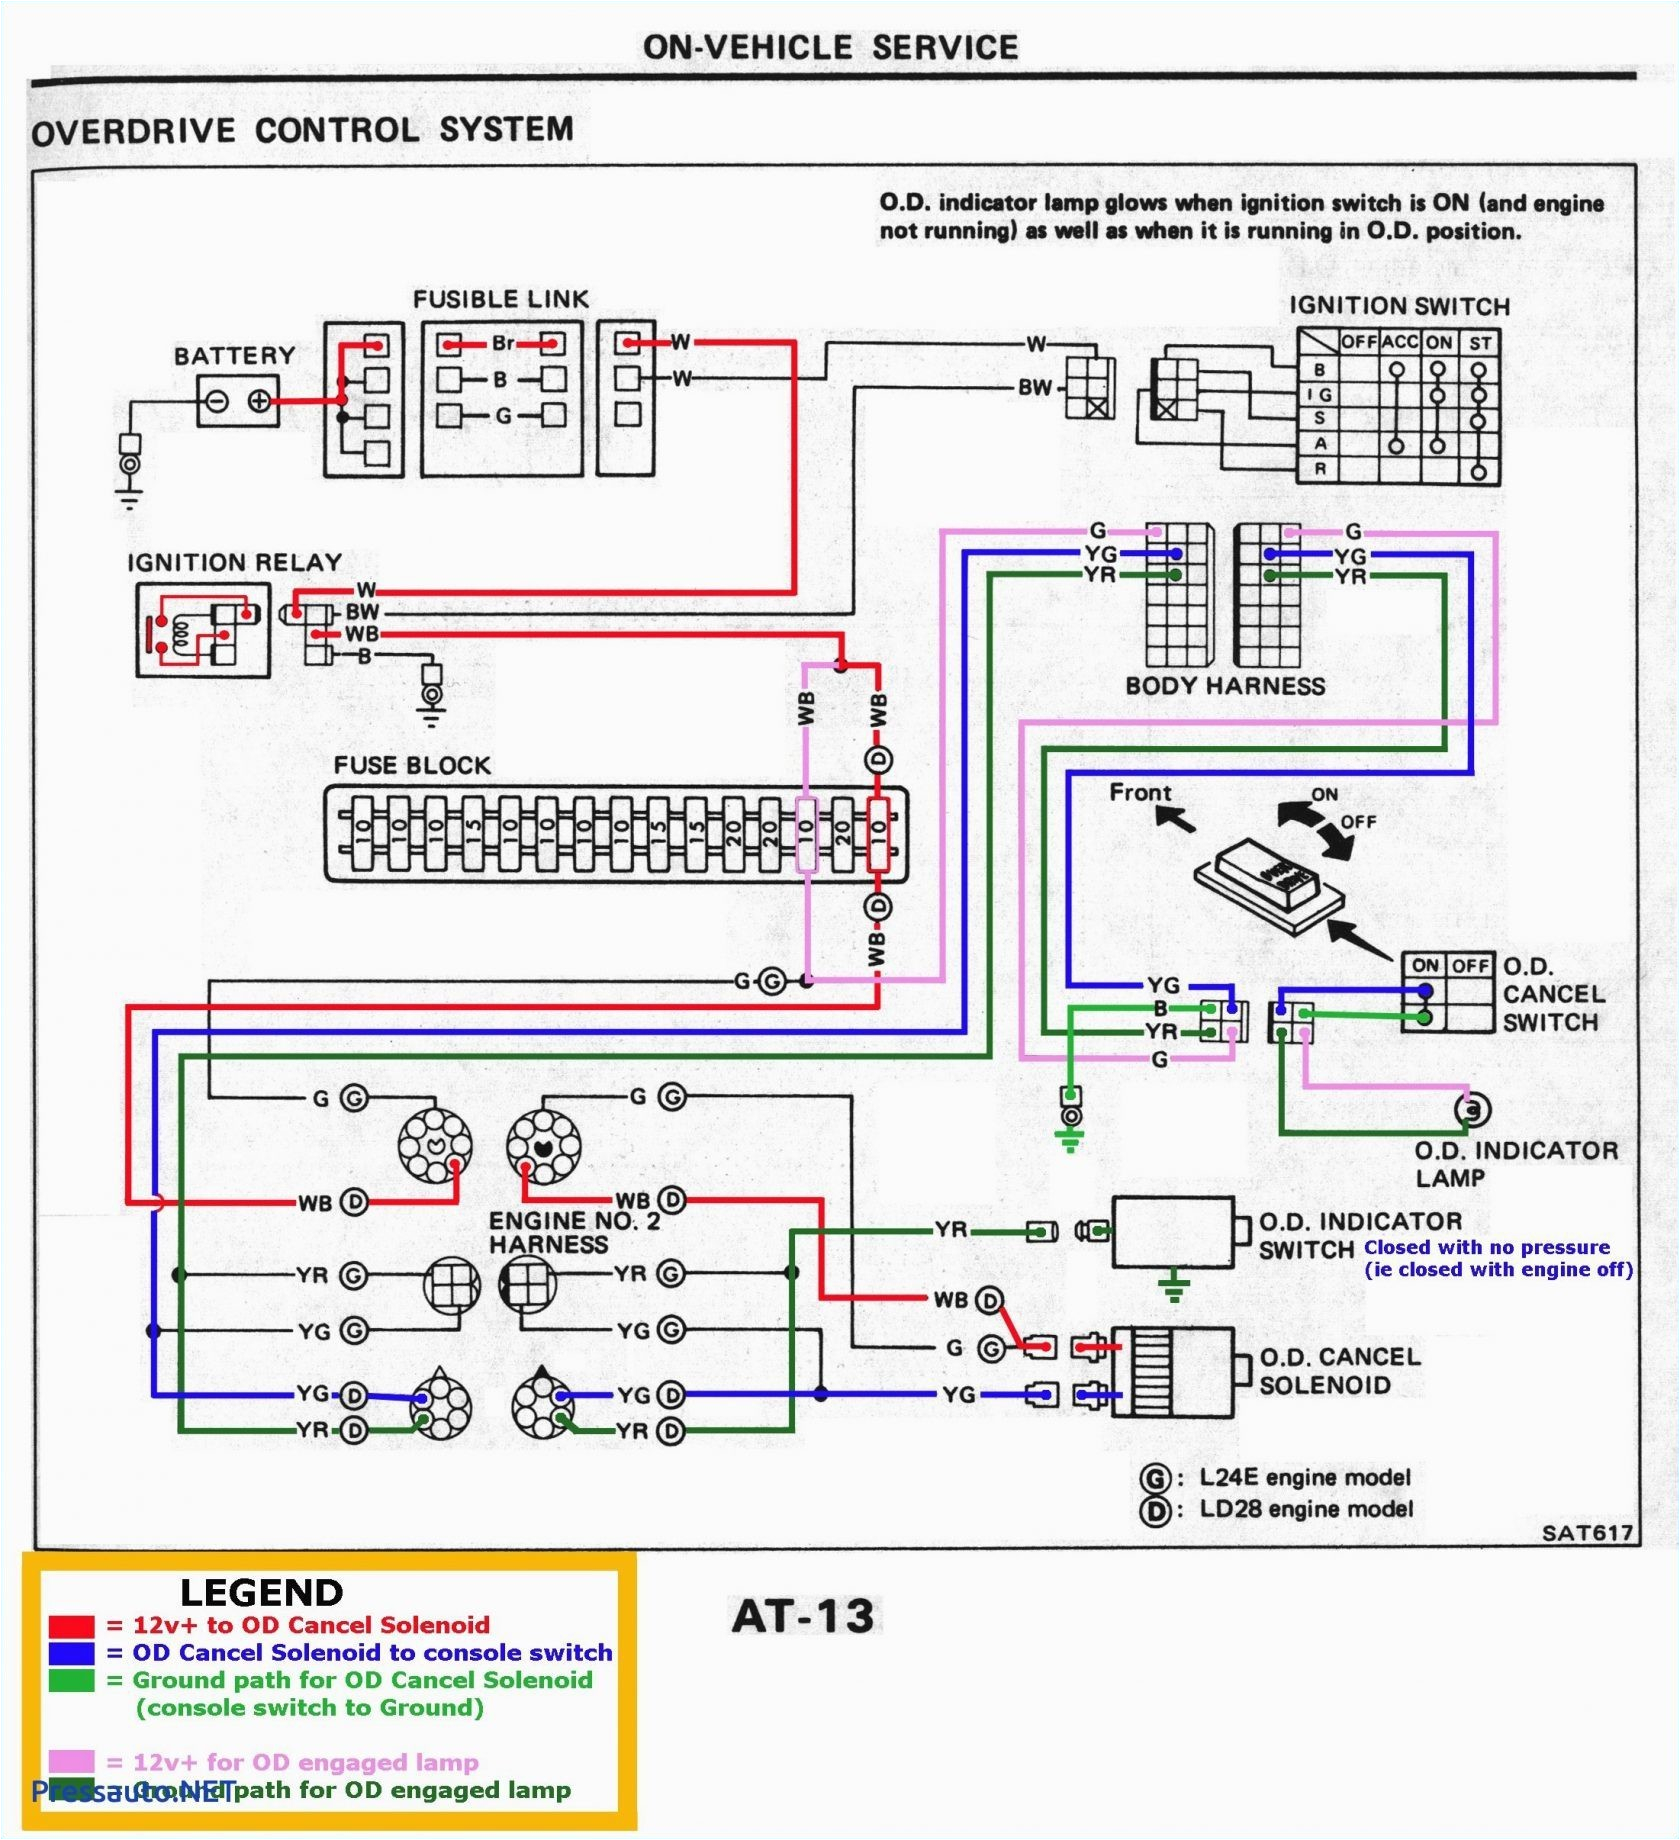 iring diagram nissan altima stereo bcma maxima bose stereo had 16 wires diagrams only account need a diagram